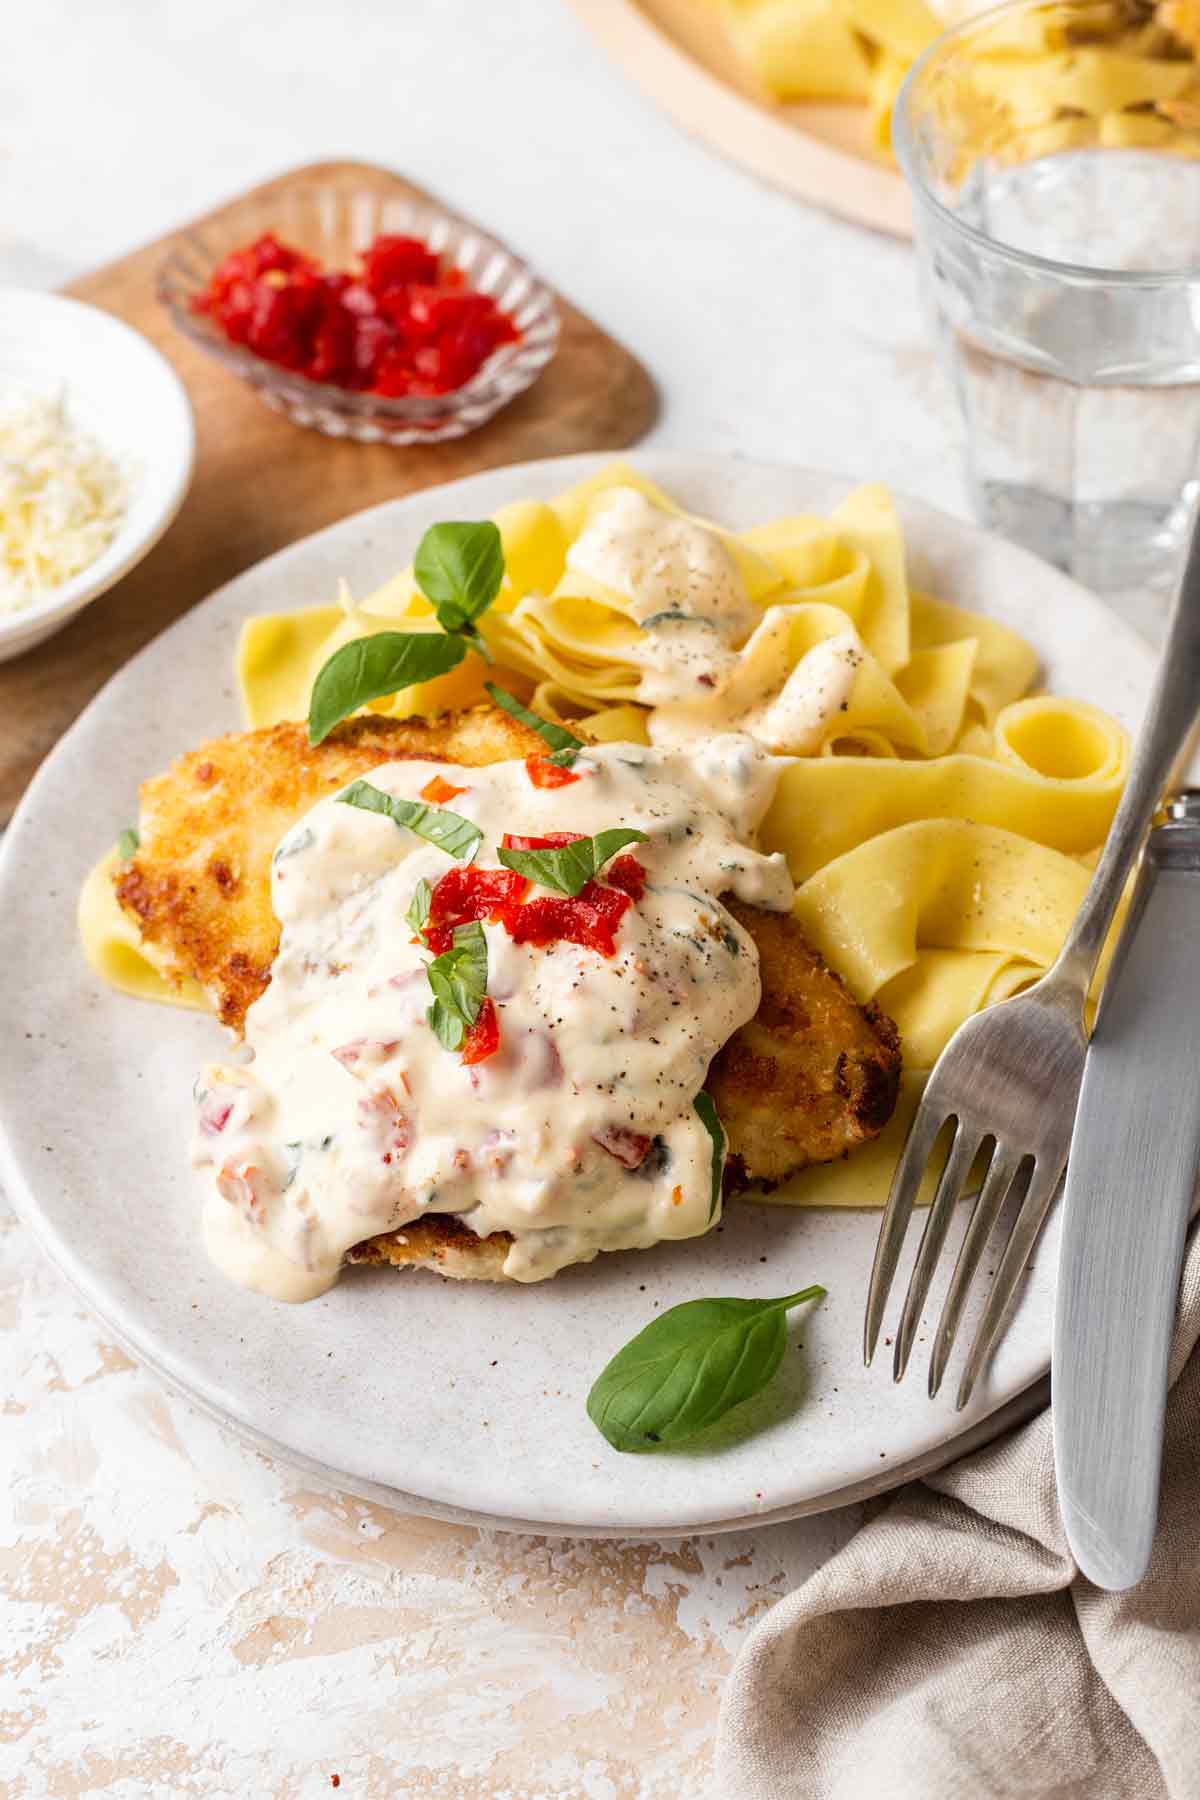 Fried Chicken with Cream Sauce and Pasta